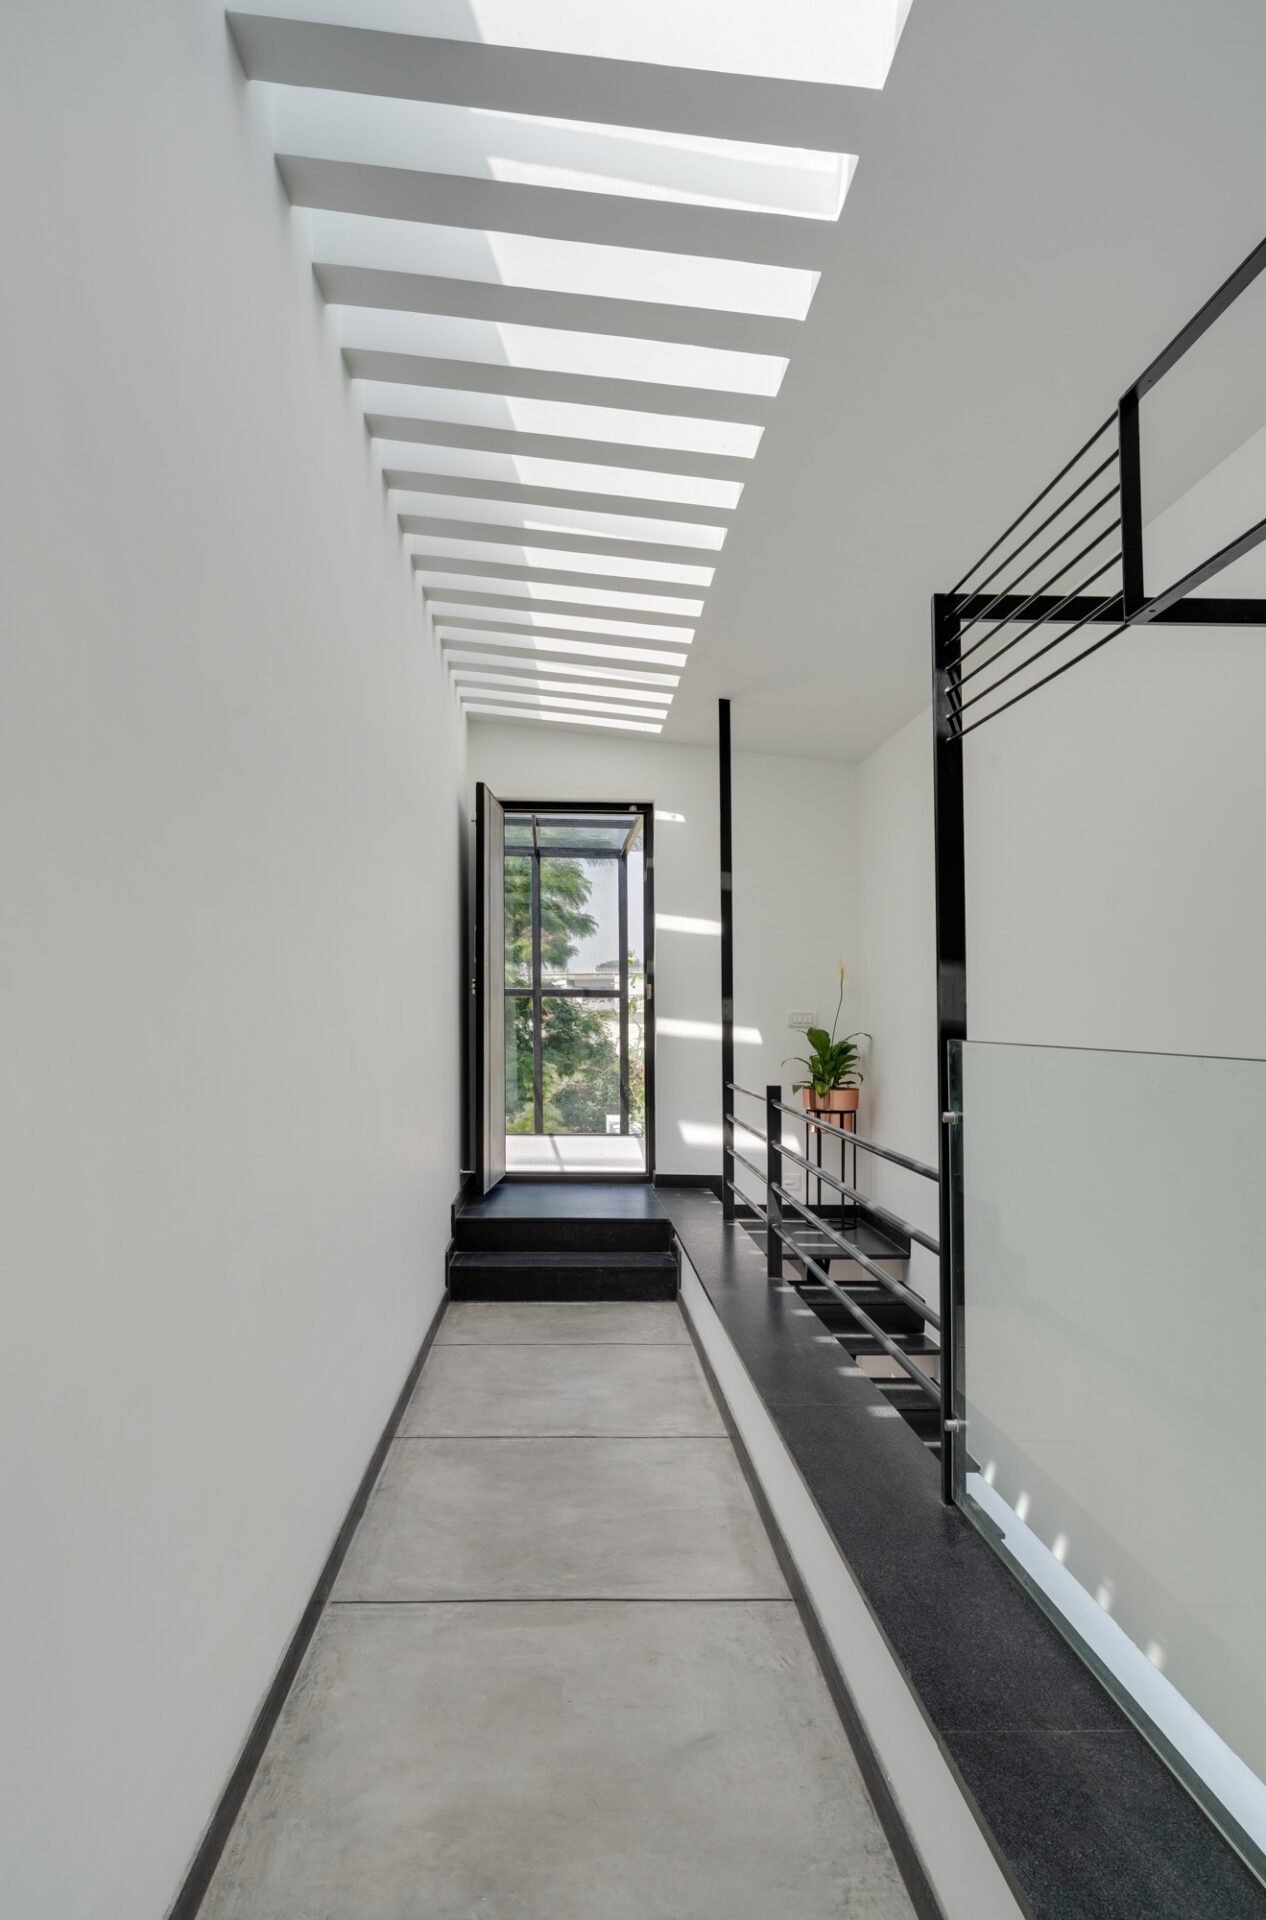 skylight-best-residential-aarchitects-in-bangalore-chennai-coimbatore-india